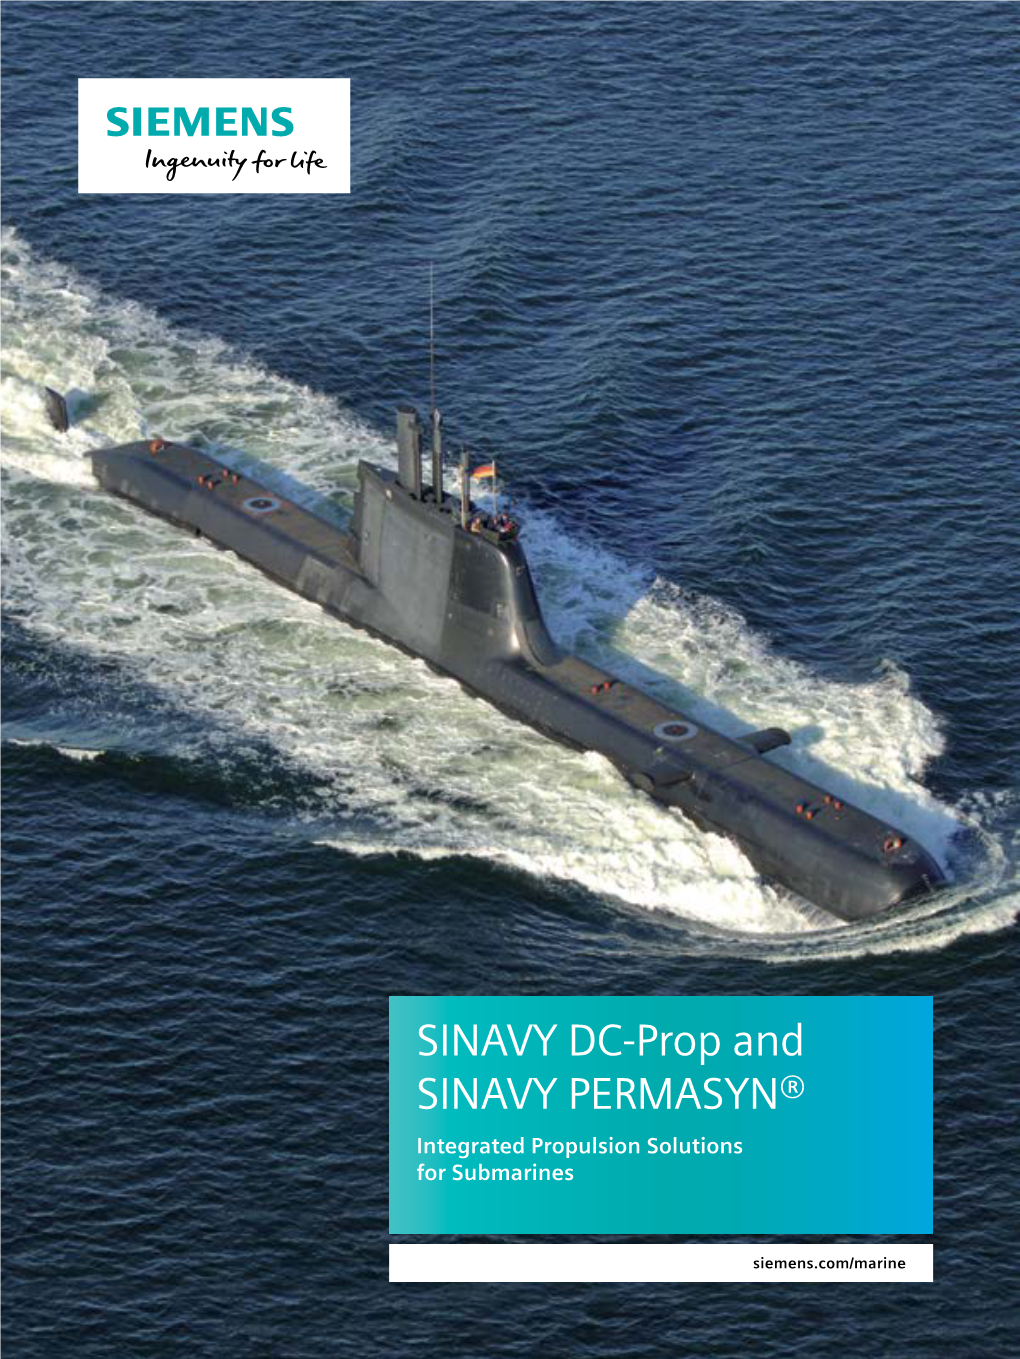 SINAVY DC-Prop and SINAVY PERMASYN® Integrated Propulsion Solutions for Submarines